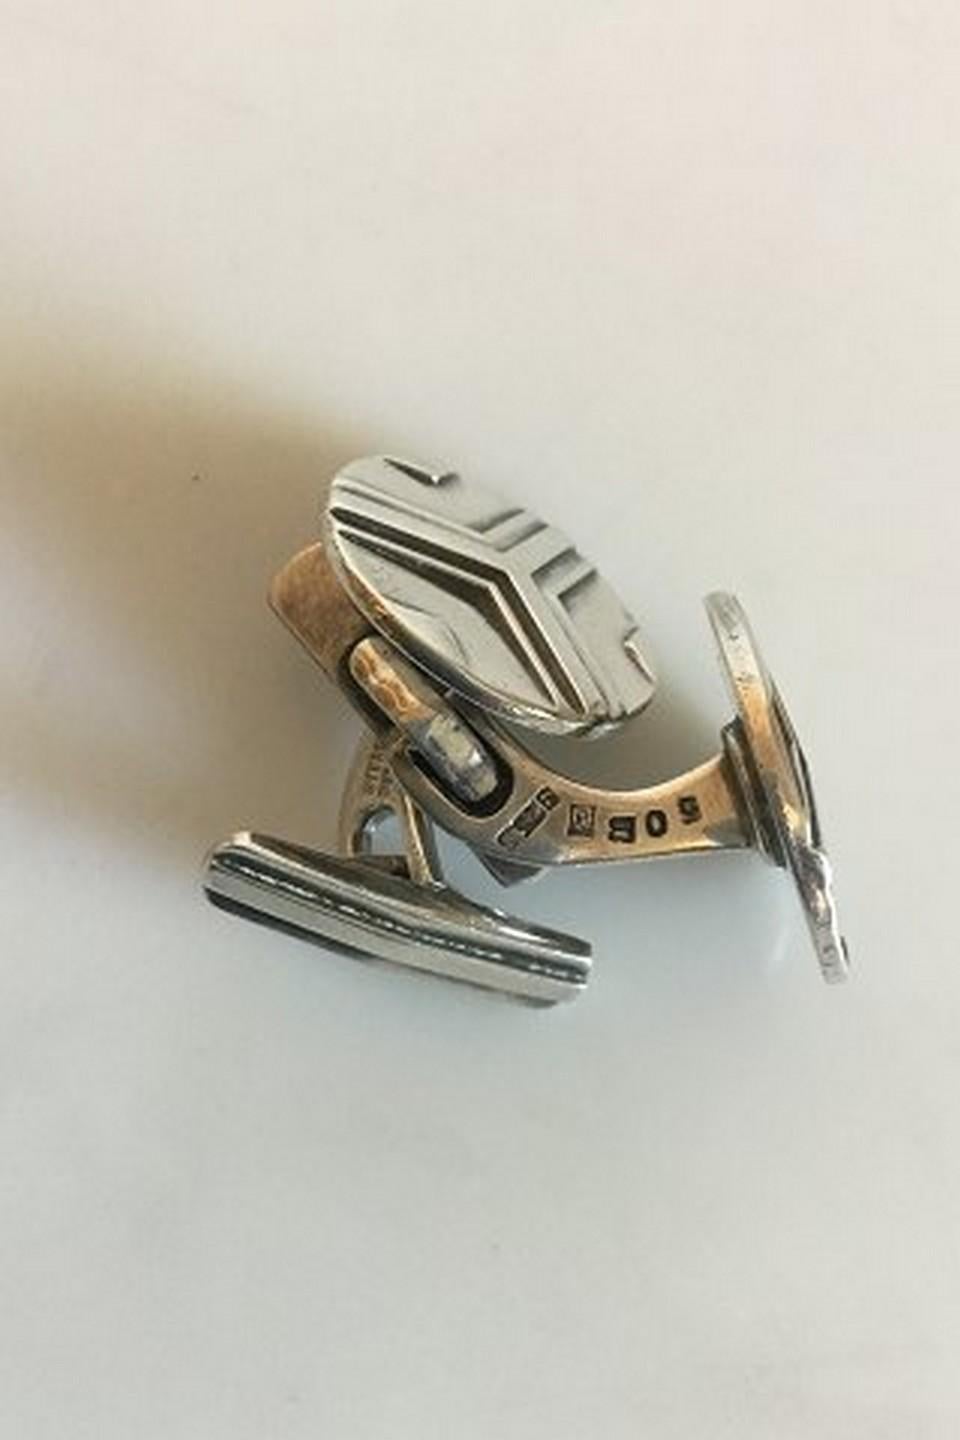 Georg Jensen Silver Cuff Links No 60B. Measures 1,8 cm / 0 48/64 in. dia.. Weighs 12.4 g / 0.44 oz. From 1932-1944